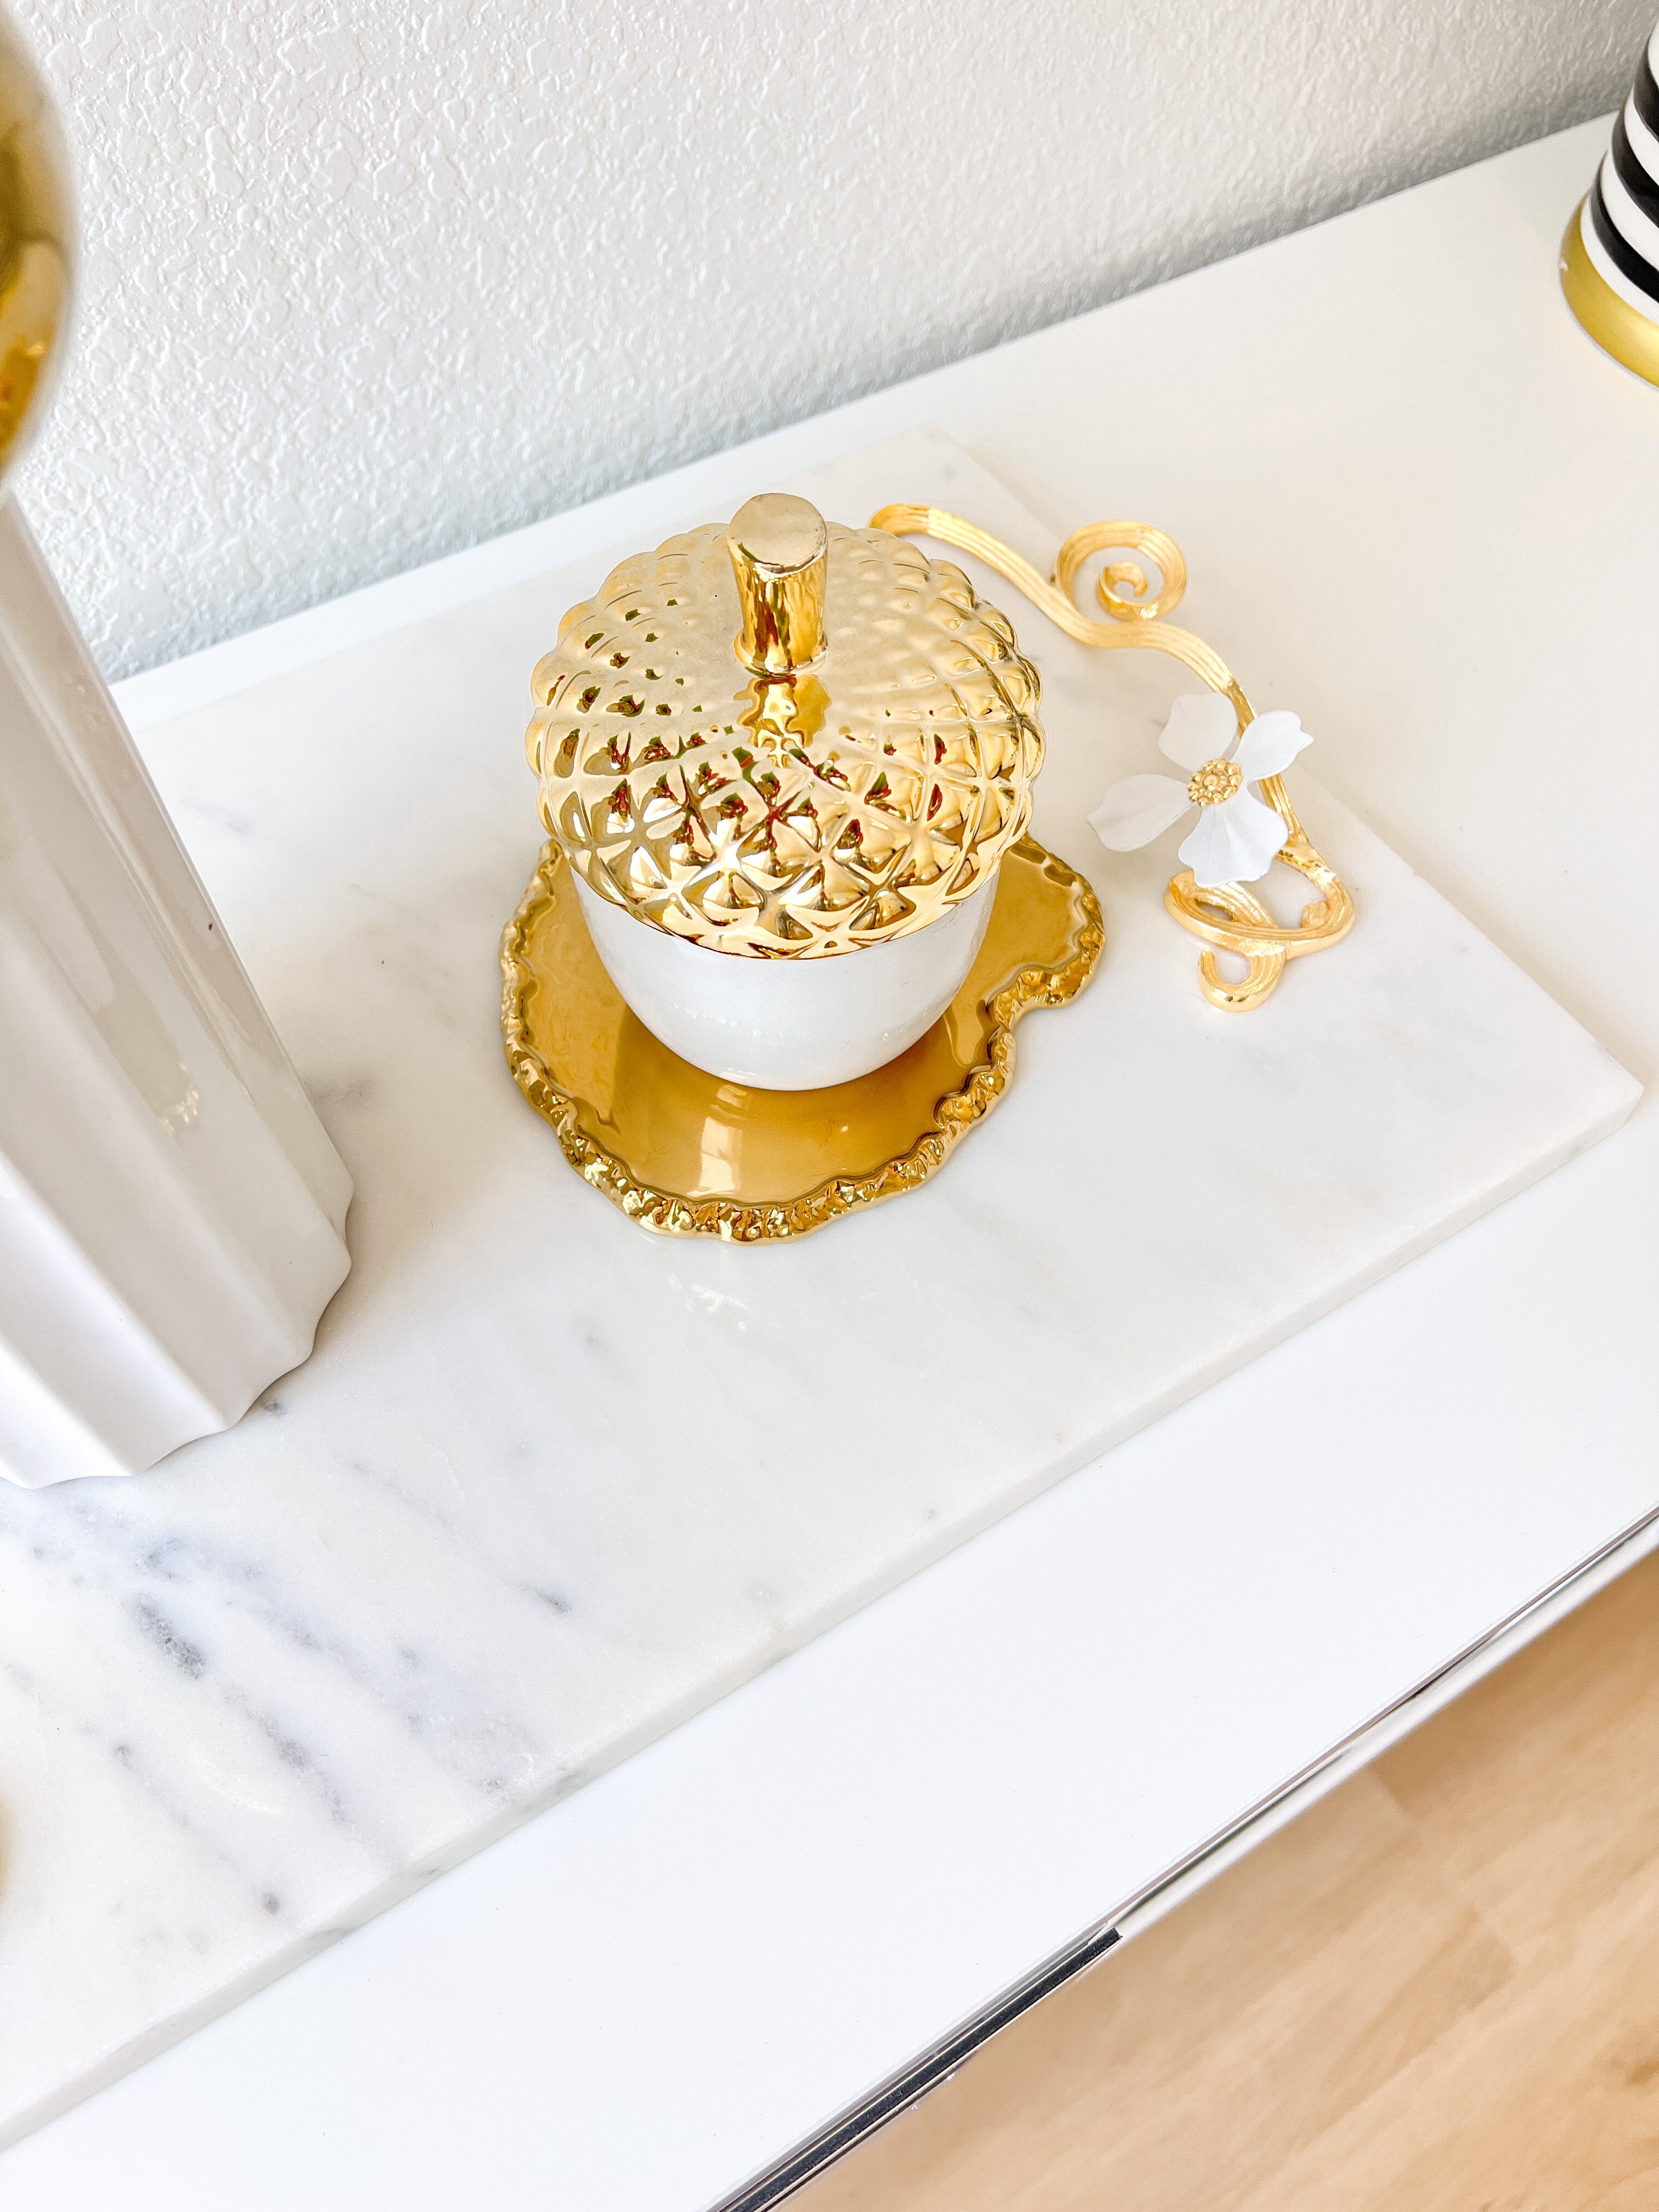 White and Gold Acorn Fall Candle (Two Styles) - HTS HOME DECOR